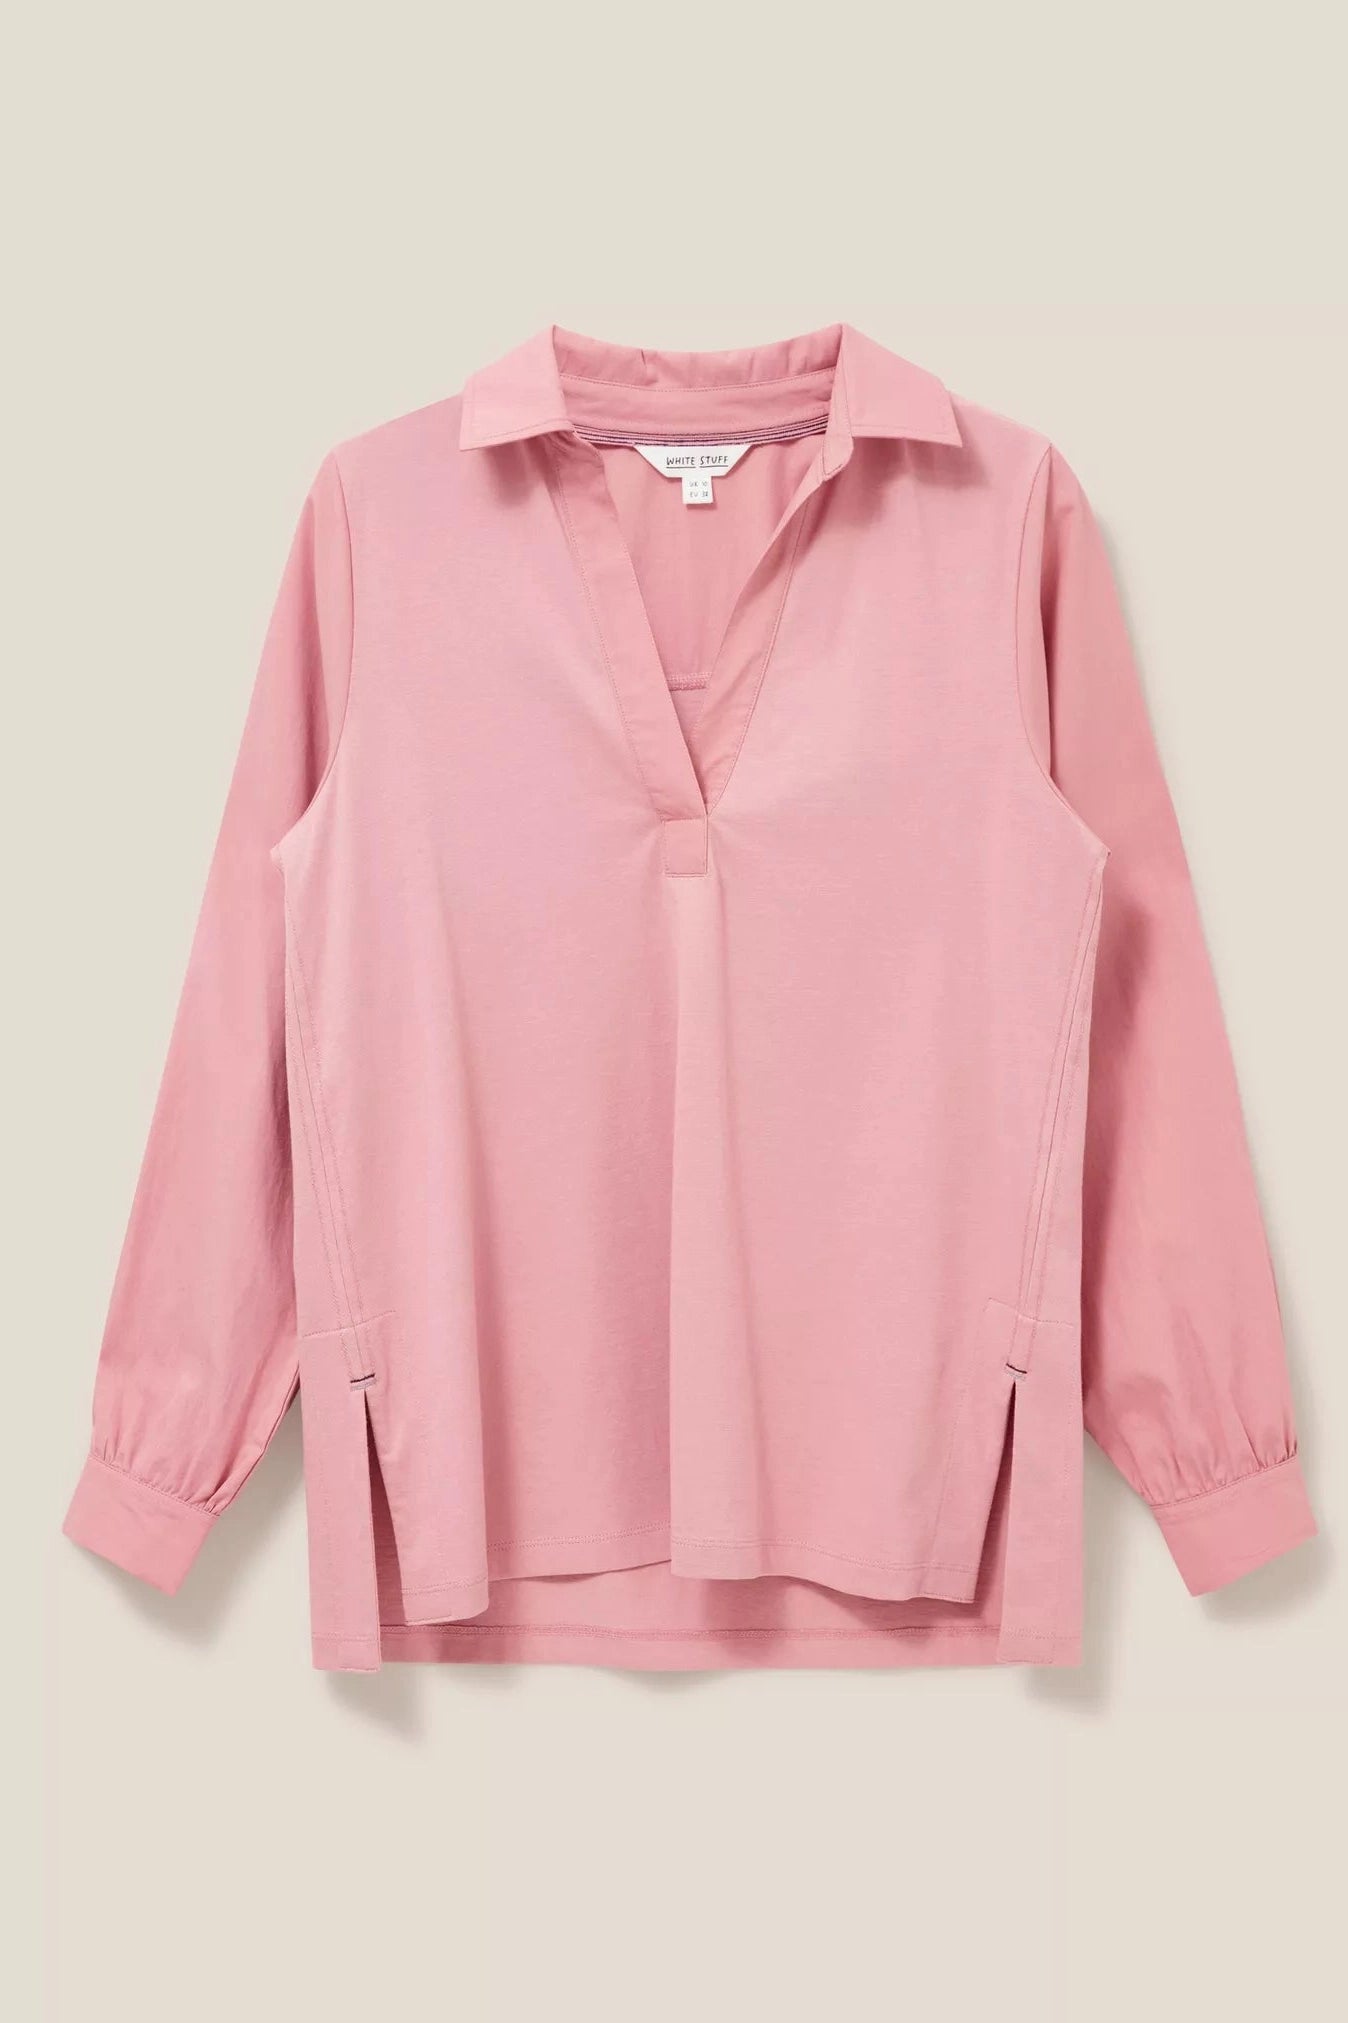 White Stuff Fran Shirt in Plain Pink-Womens-Ohh! By Gum - Shop Sustainable